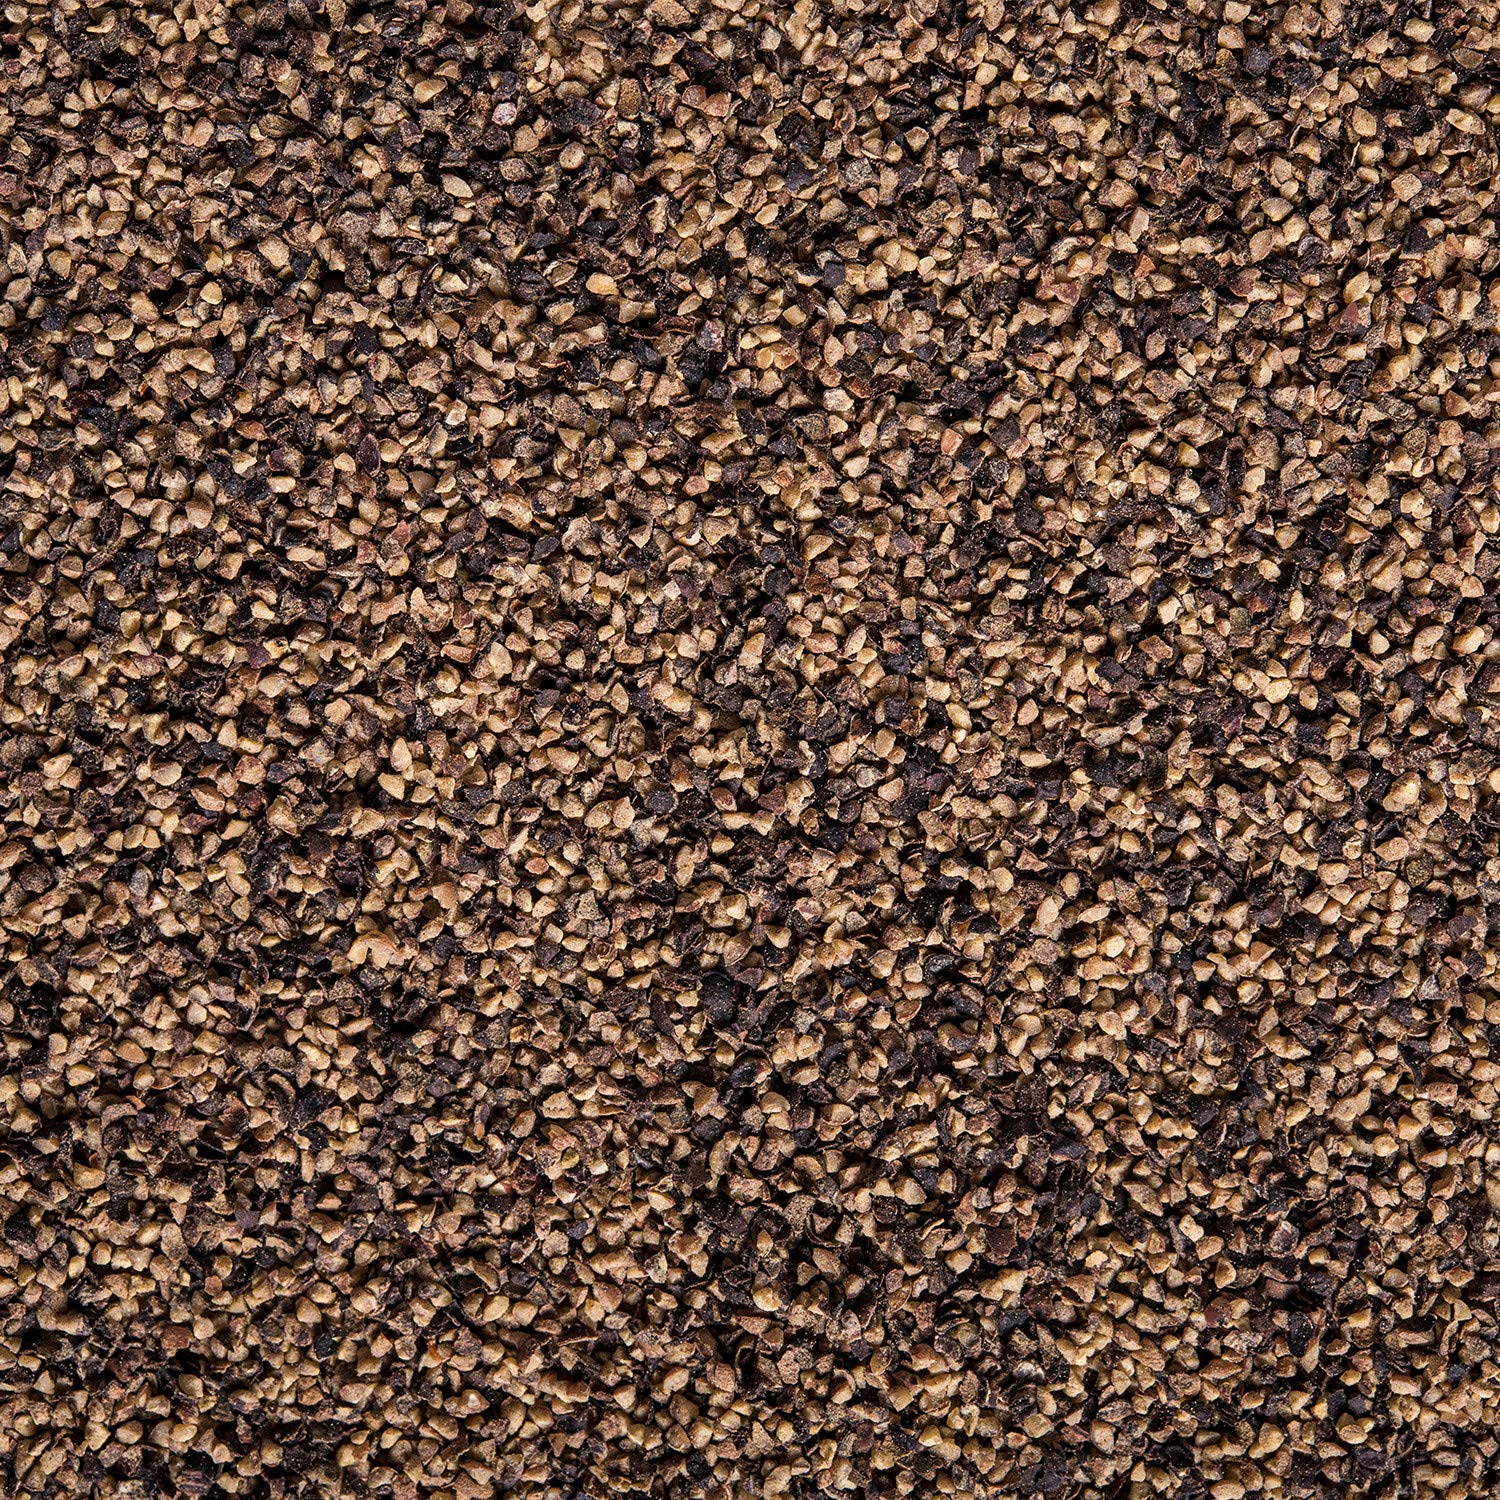 McCormick Pure Ground Black Pepper: A Flavorful Essential for Every Kitchen